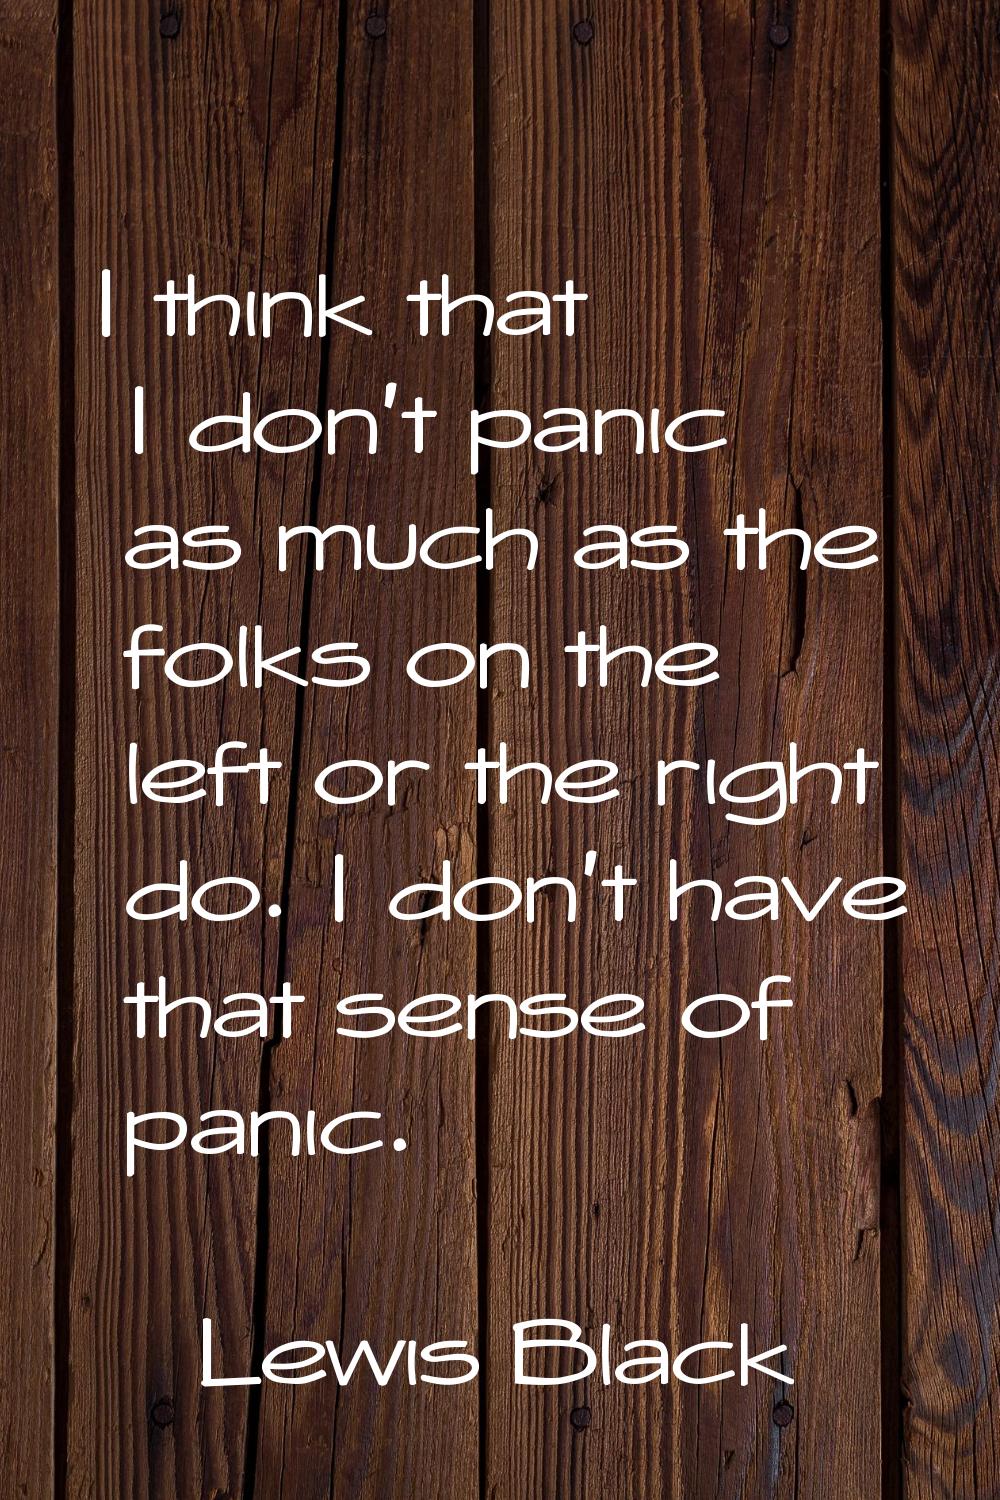 I think that I don't panic as much as the folks on the left or the right do. I don't have that sens